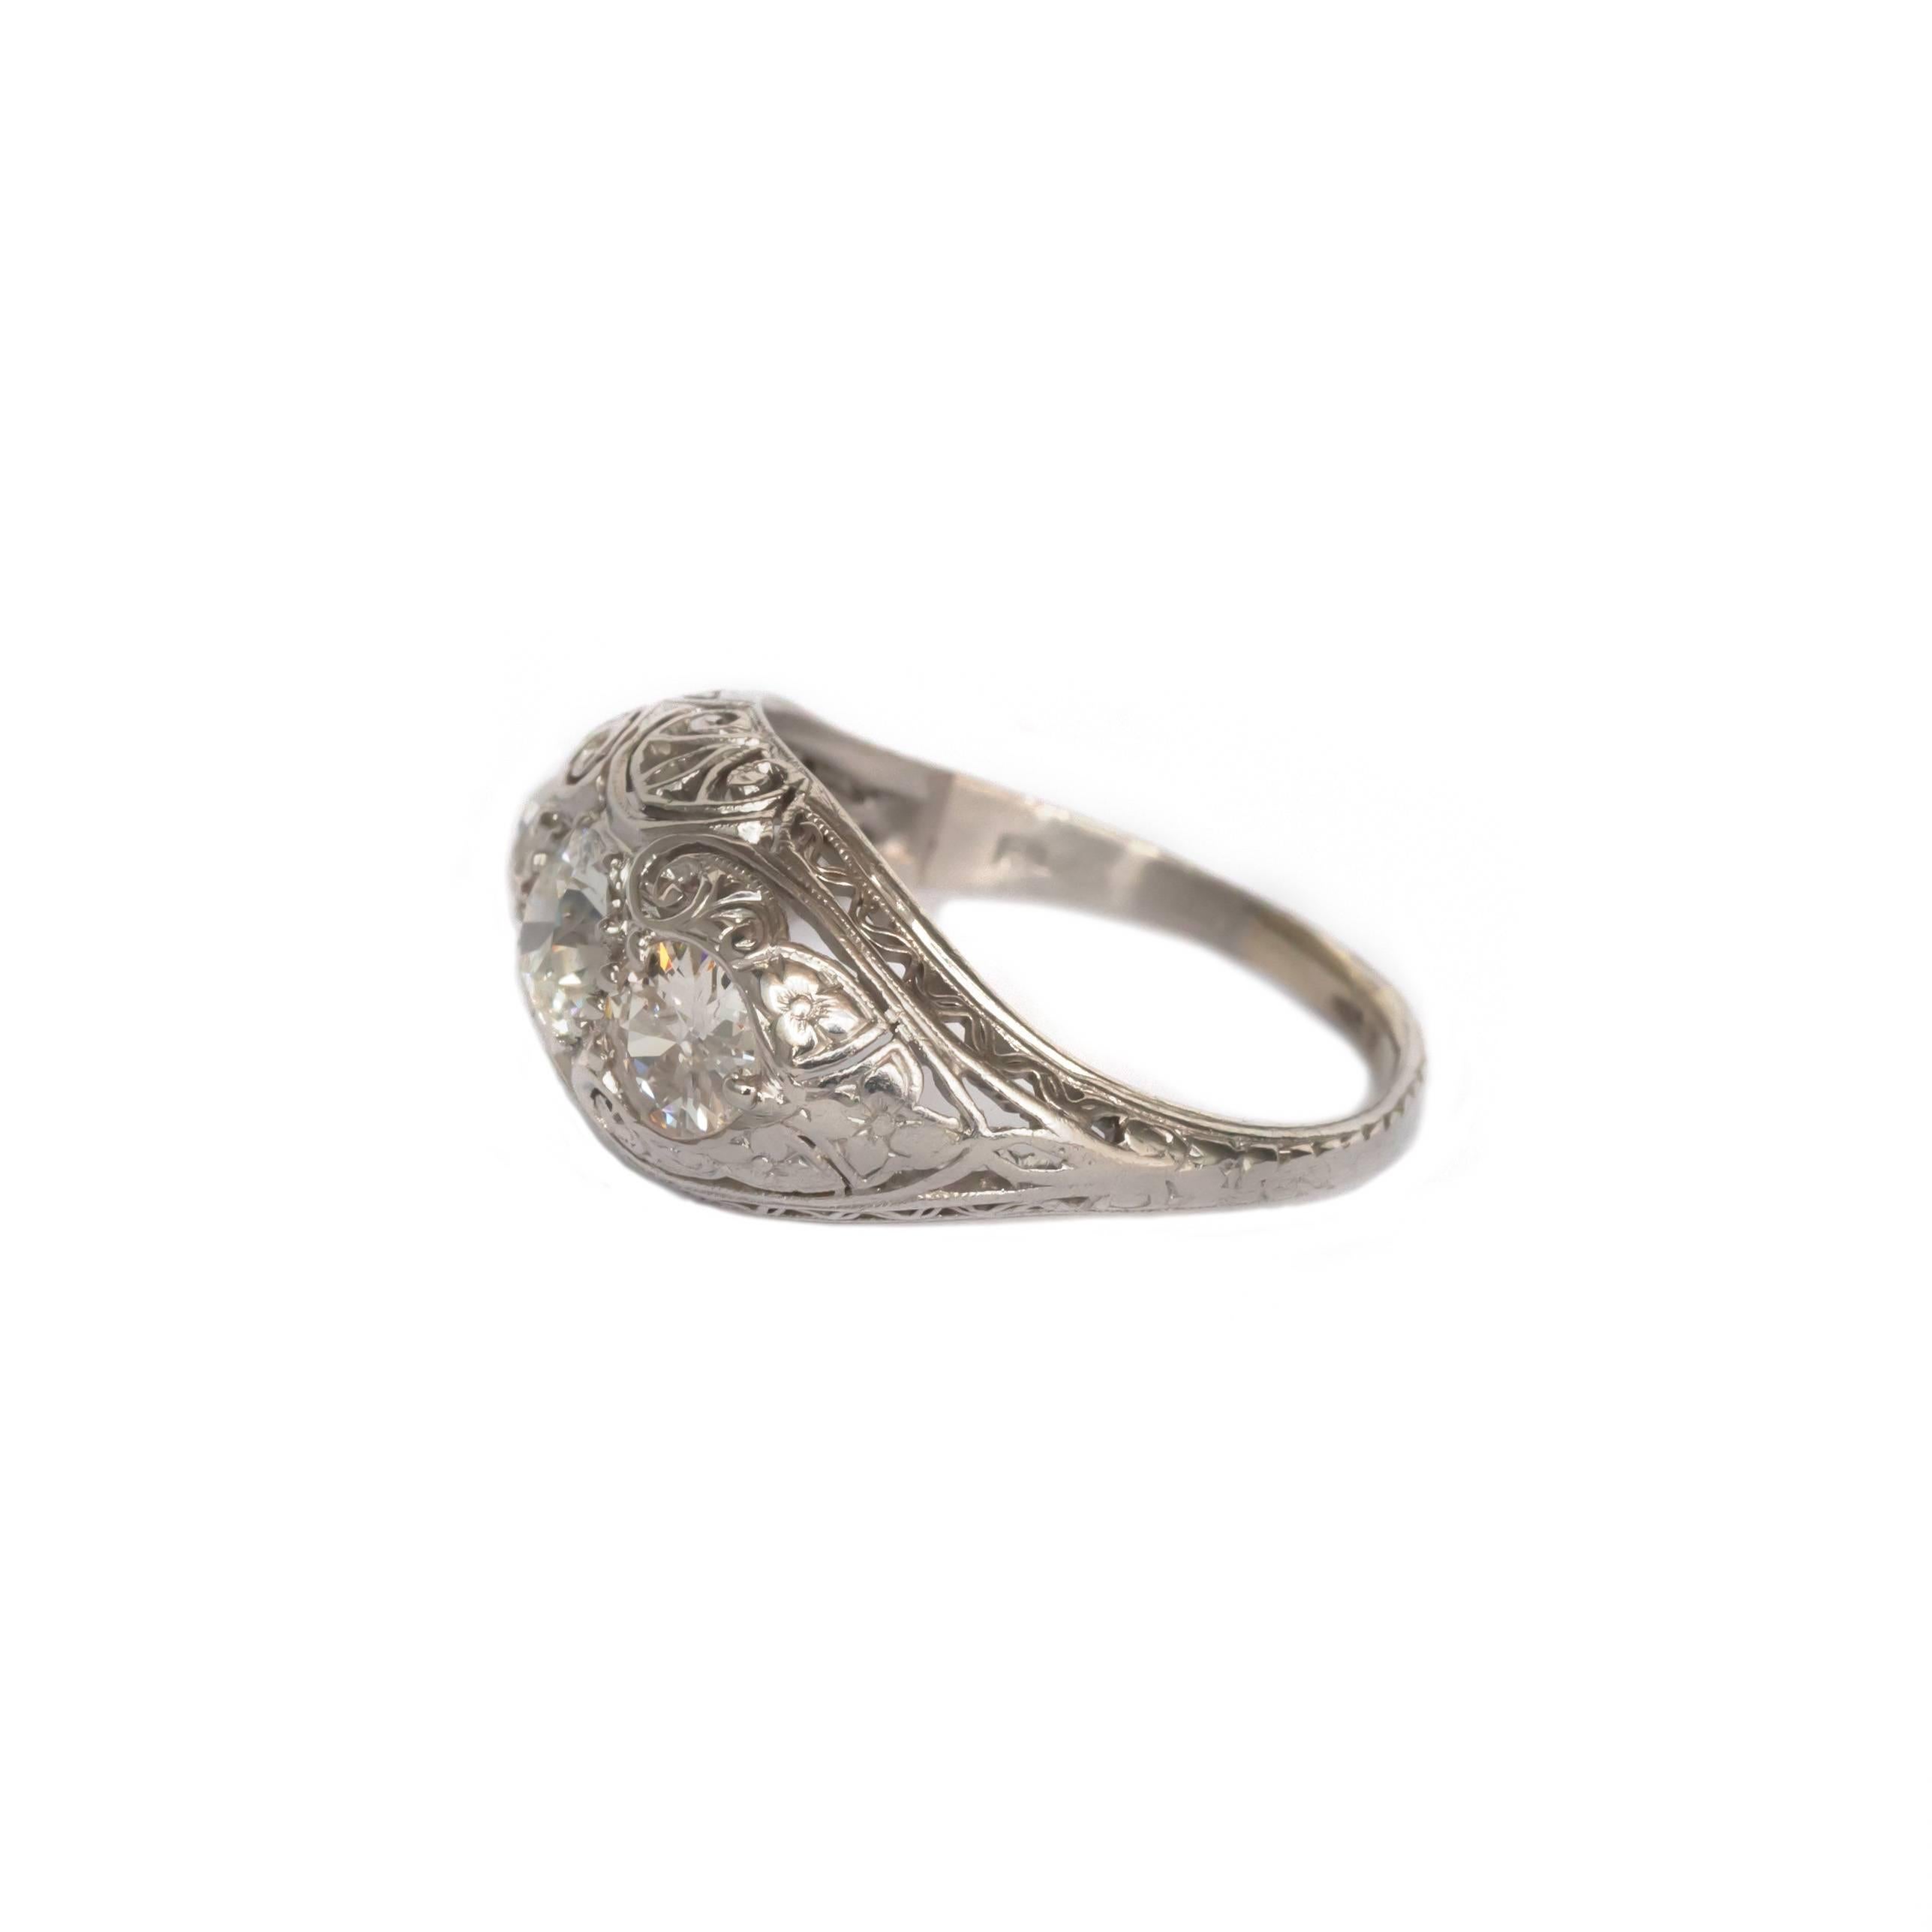 Ring Size: 5.25
Metal Type: Platinum
Weight: 3.8 grams

Diamond Details
Shape: Old European Brilliant 
Total Carat Weight: 1.10 carat total weight
Color: F
Clarity: SI1

Finger to Top of Stone Measurement: 4.25mm